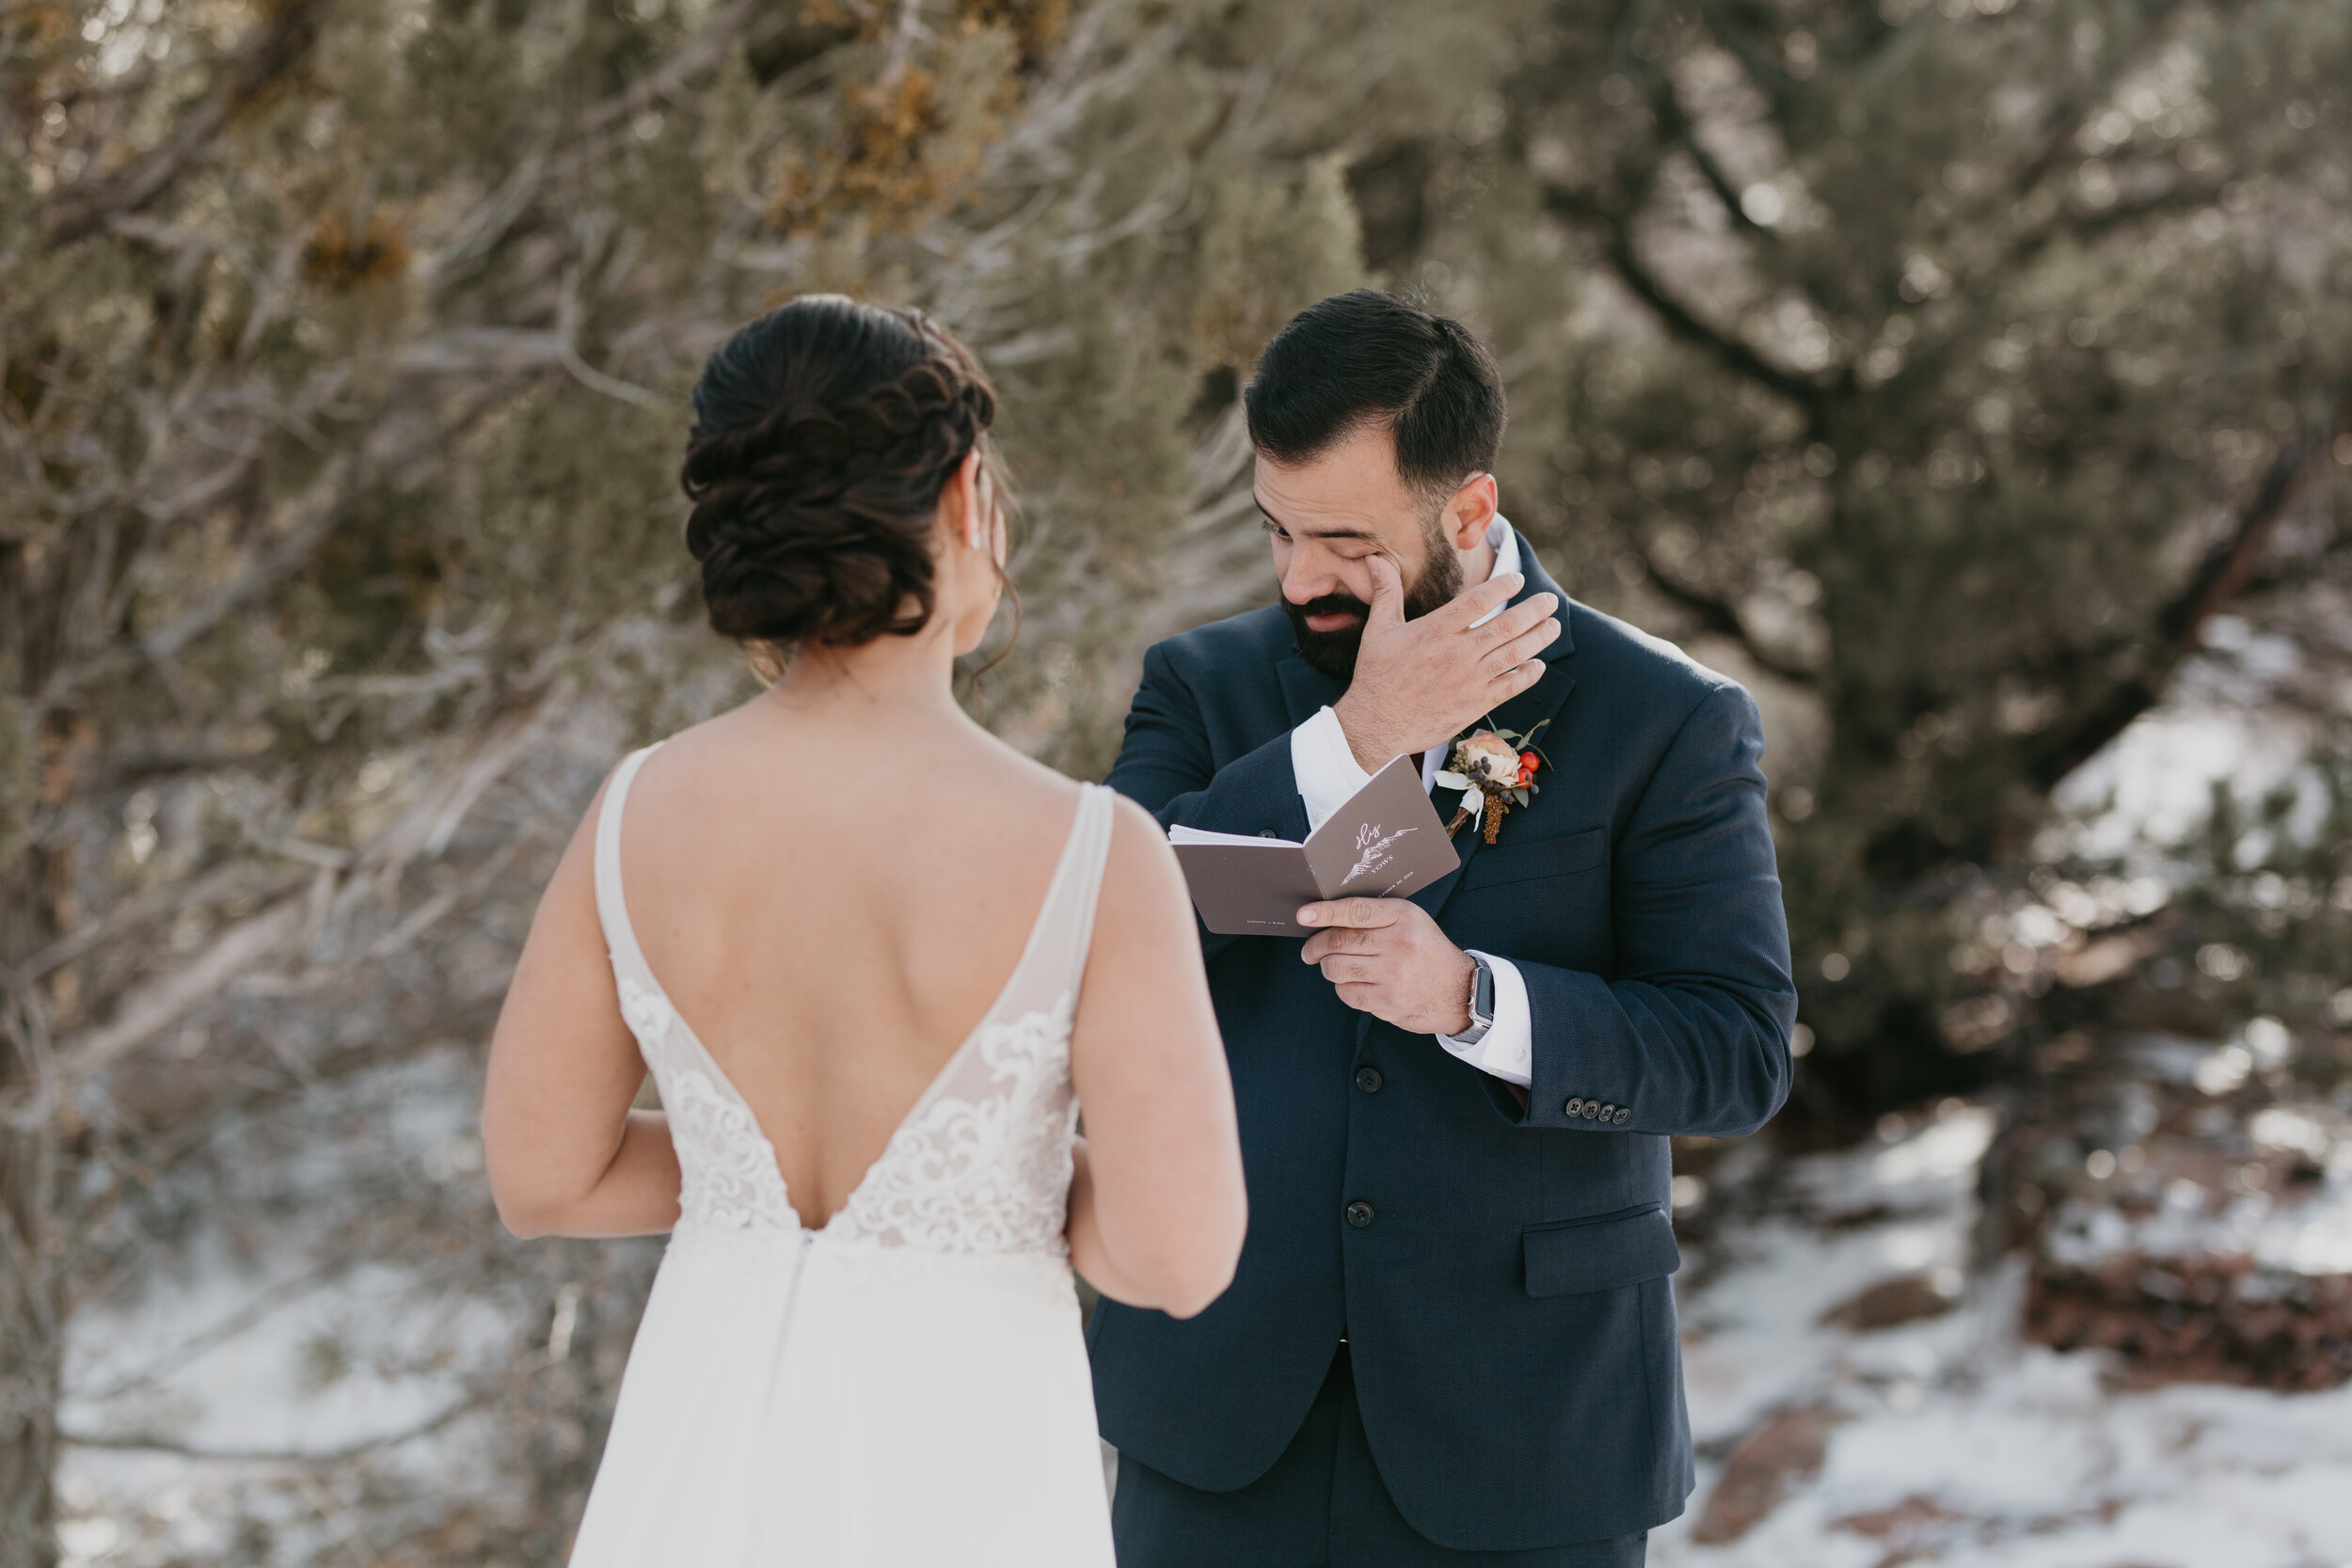 Nicole-Daacke-Photography-snowy-hiking-elopement-in-zion-national-park-zion-elopement-photographer-canyon-overlook-trial-brial-portraits-in-mt-zion-national-park-utah-desert-adventure-elopement-photographer-121.jpg